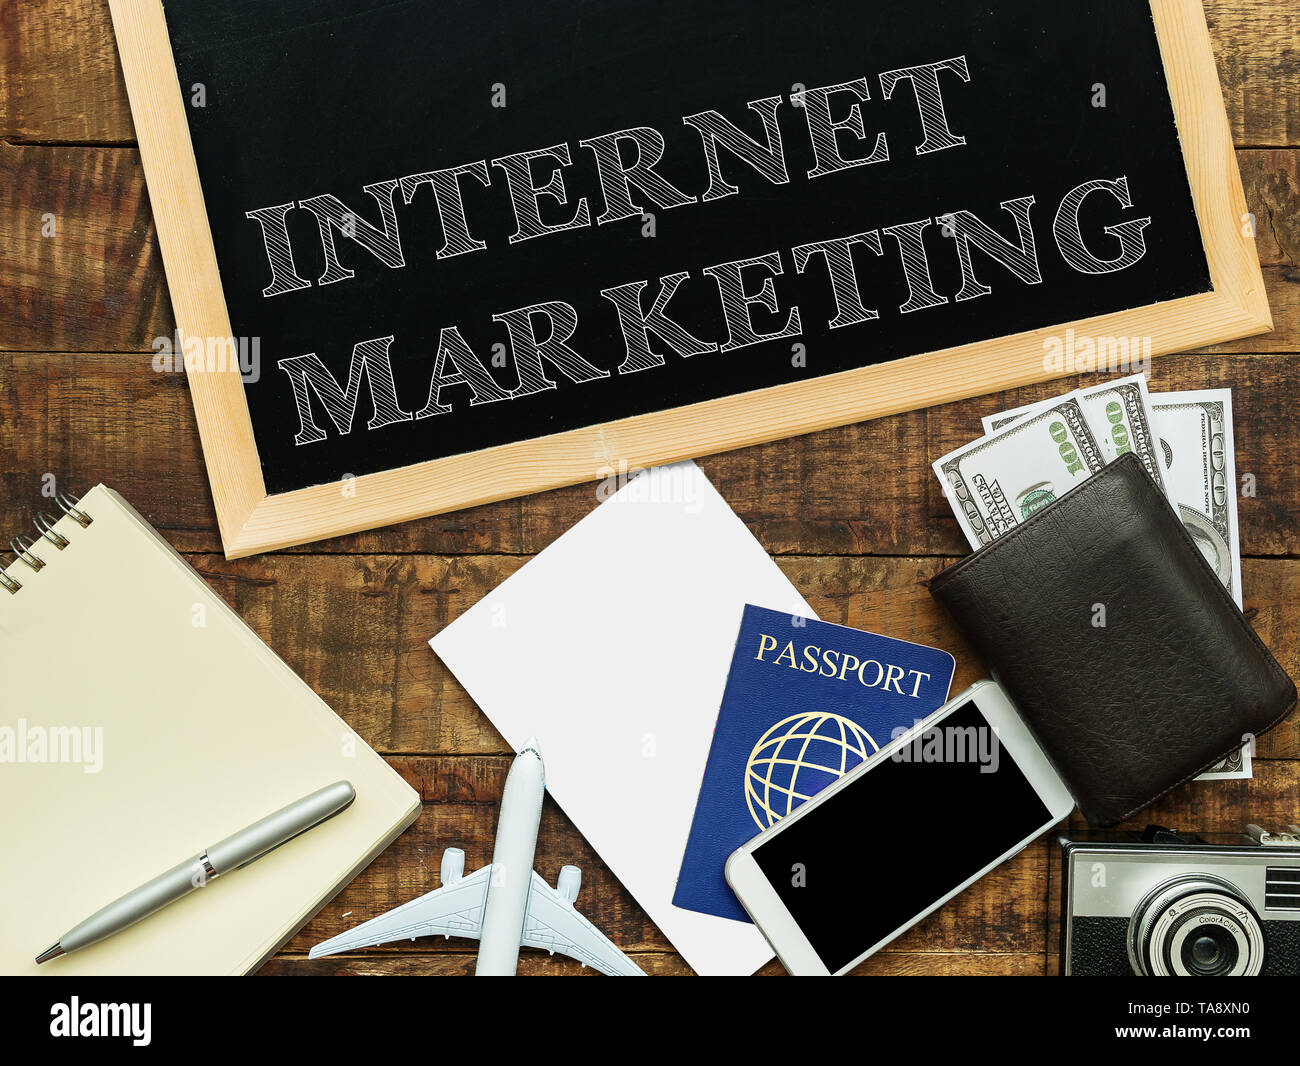 internet marketing handwritten with white chalk on a blackboard, money wallet , notebook and smartphone on a wooden background Stock Photo